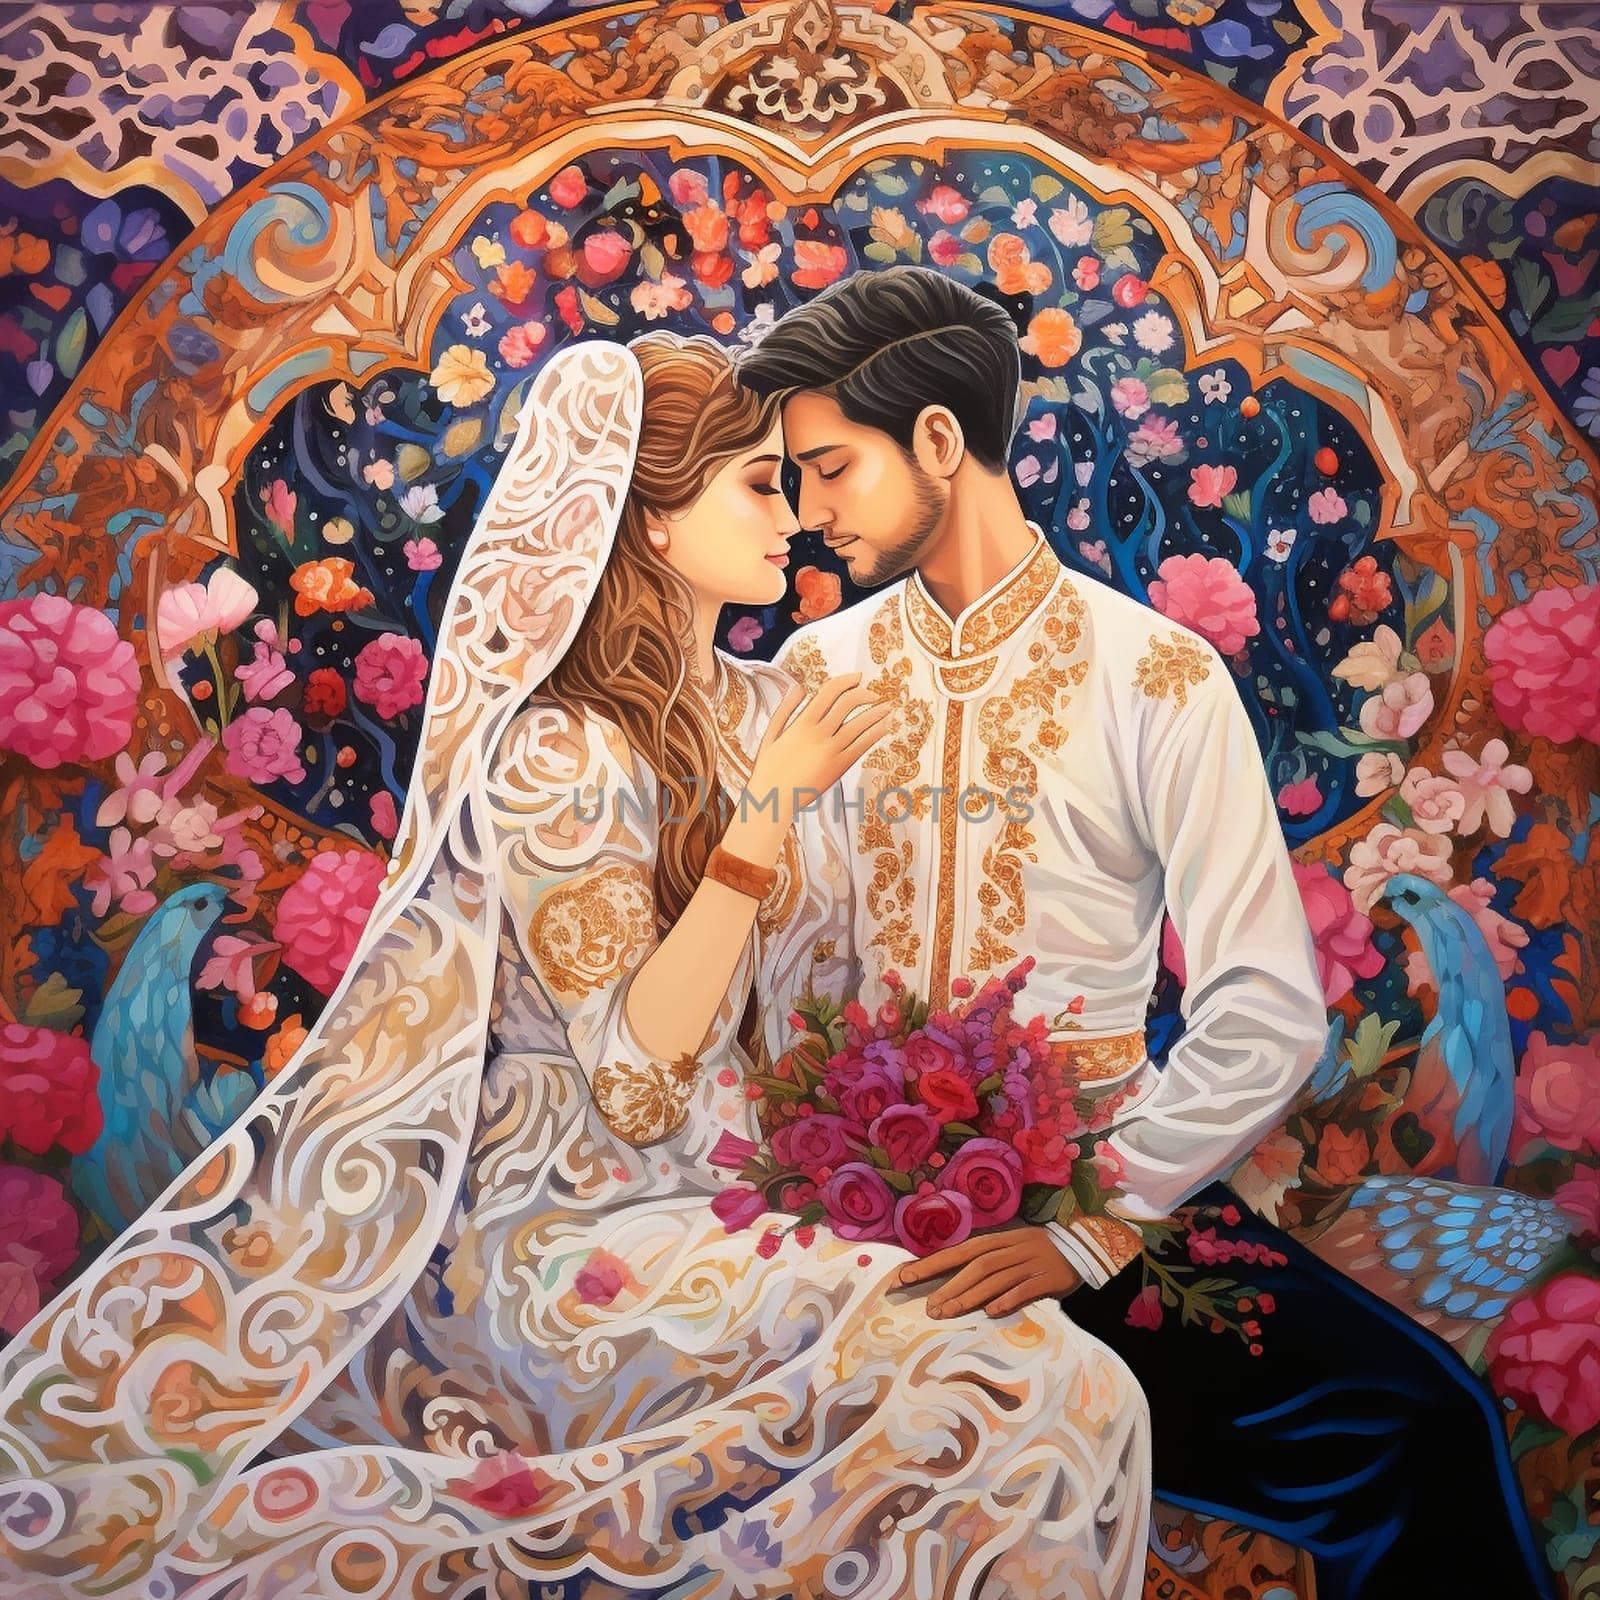 Traditional wedding vow exchange in front of intricately designed love-themed tapestry by Sahin